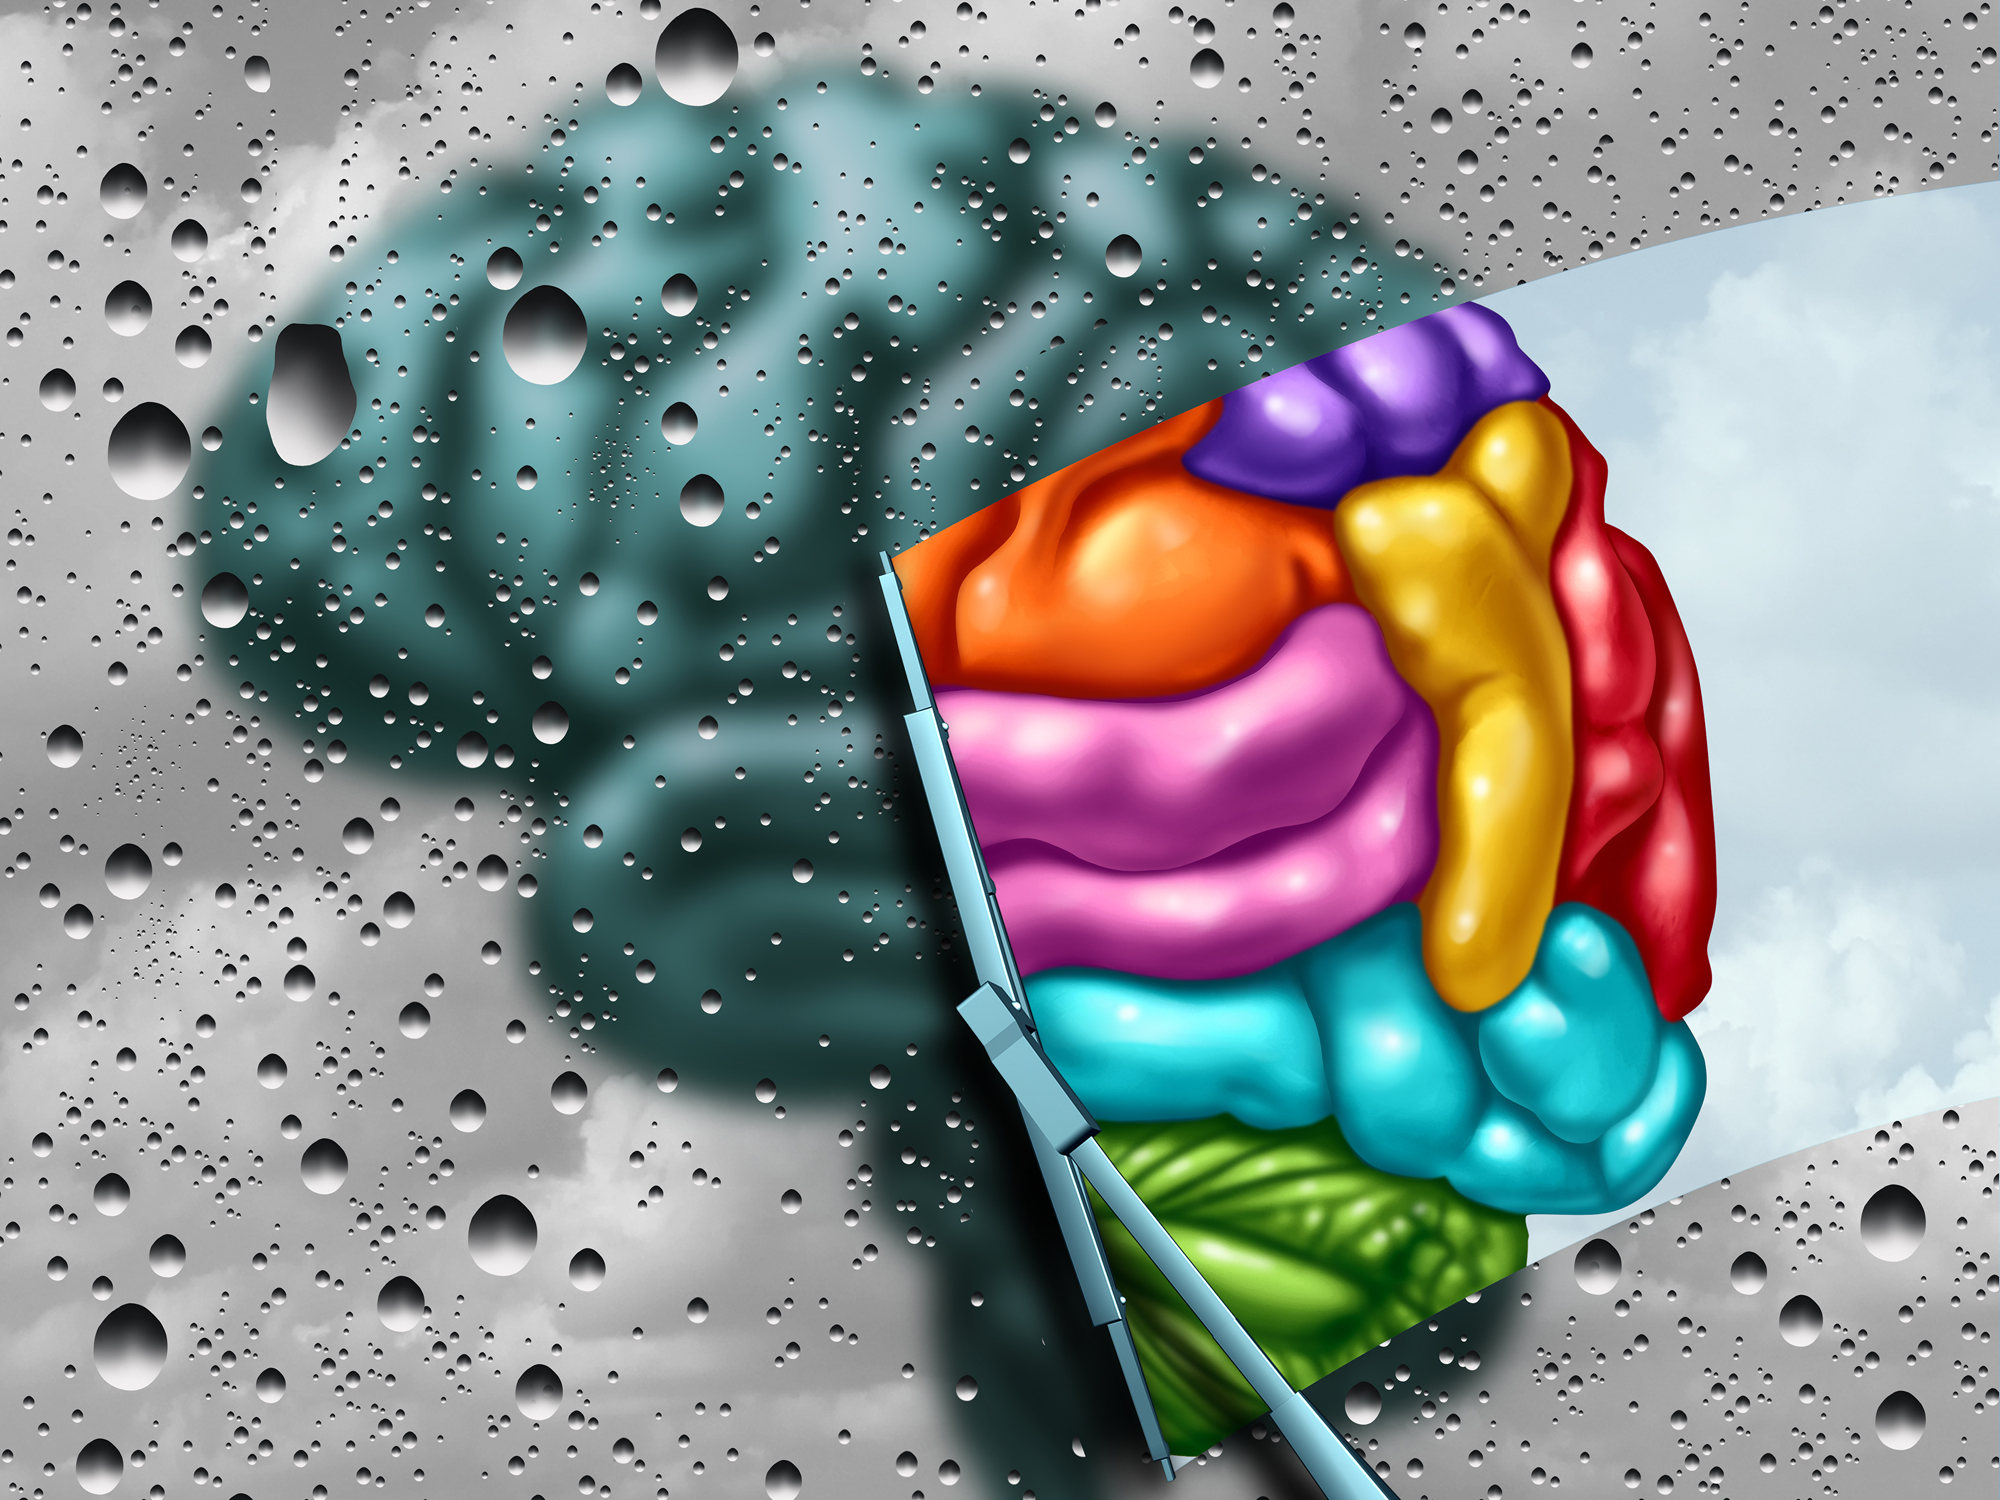 Your brain pH can make you prone to Alzheimer’s